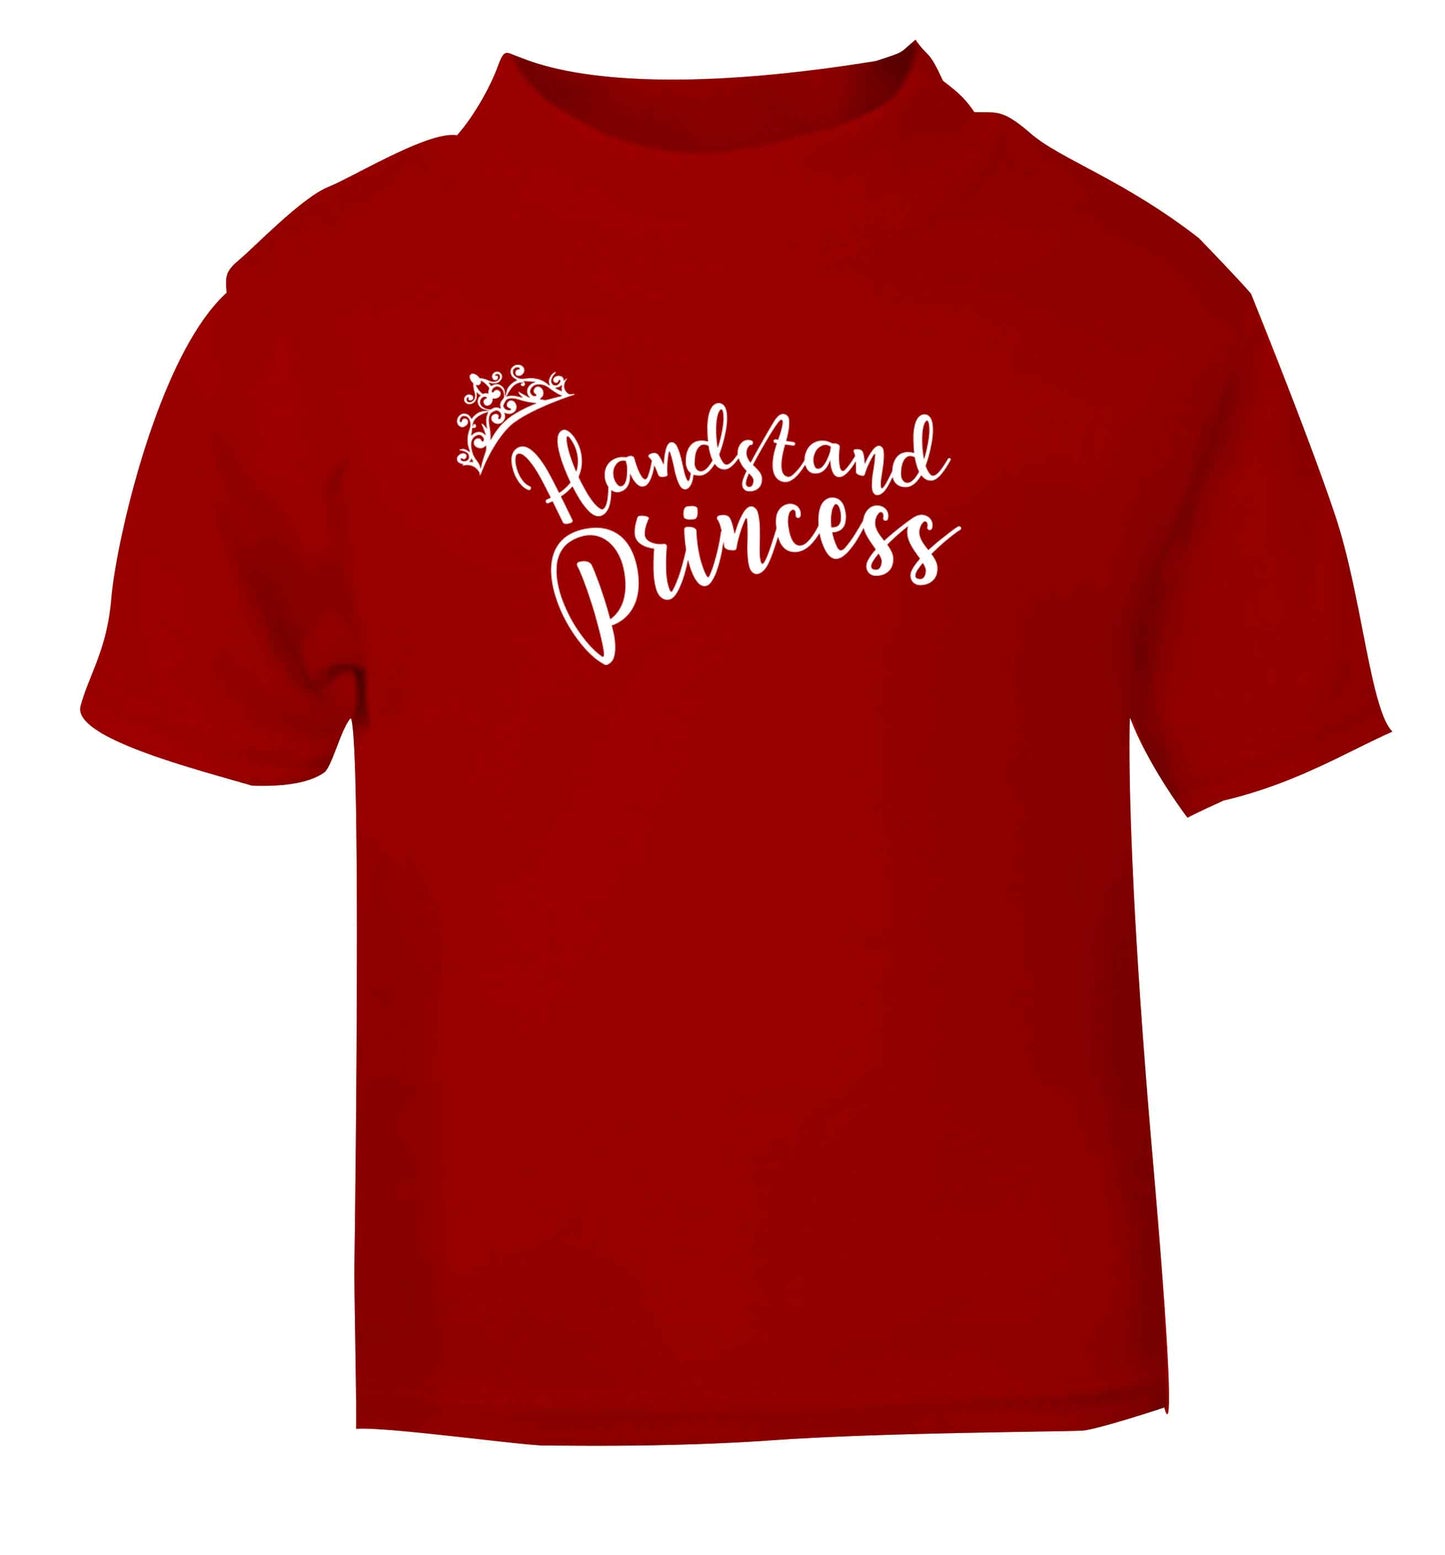 Handstand princess red Baby Toddler Tshirt 2 Years